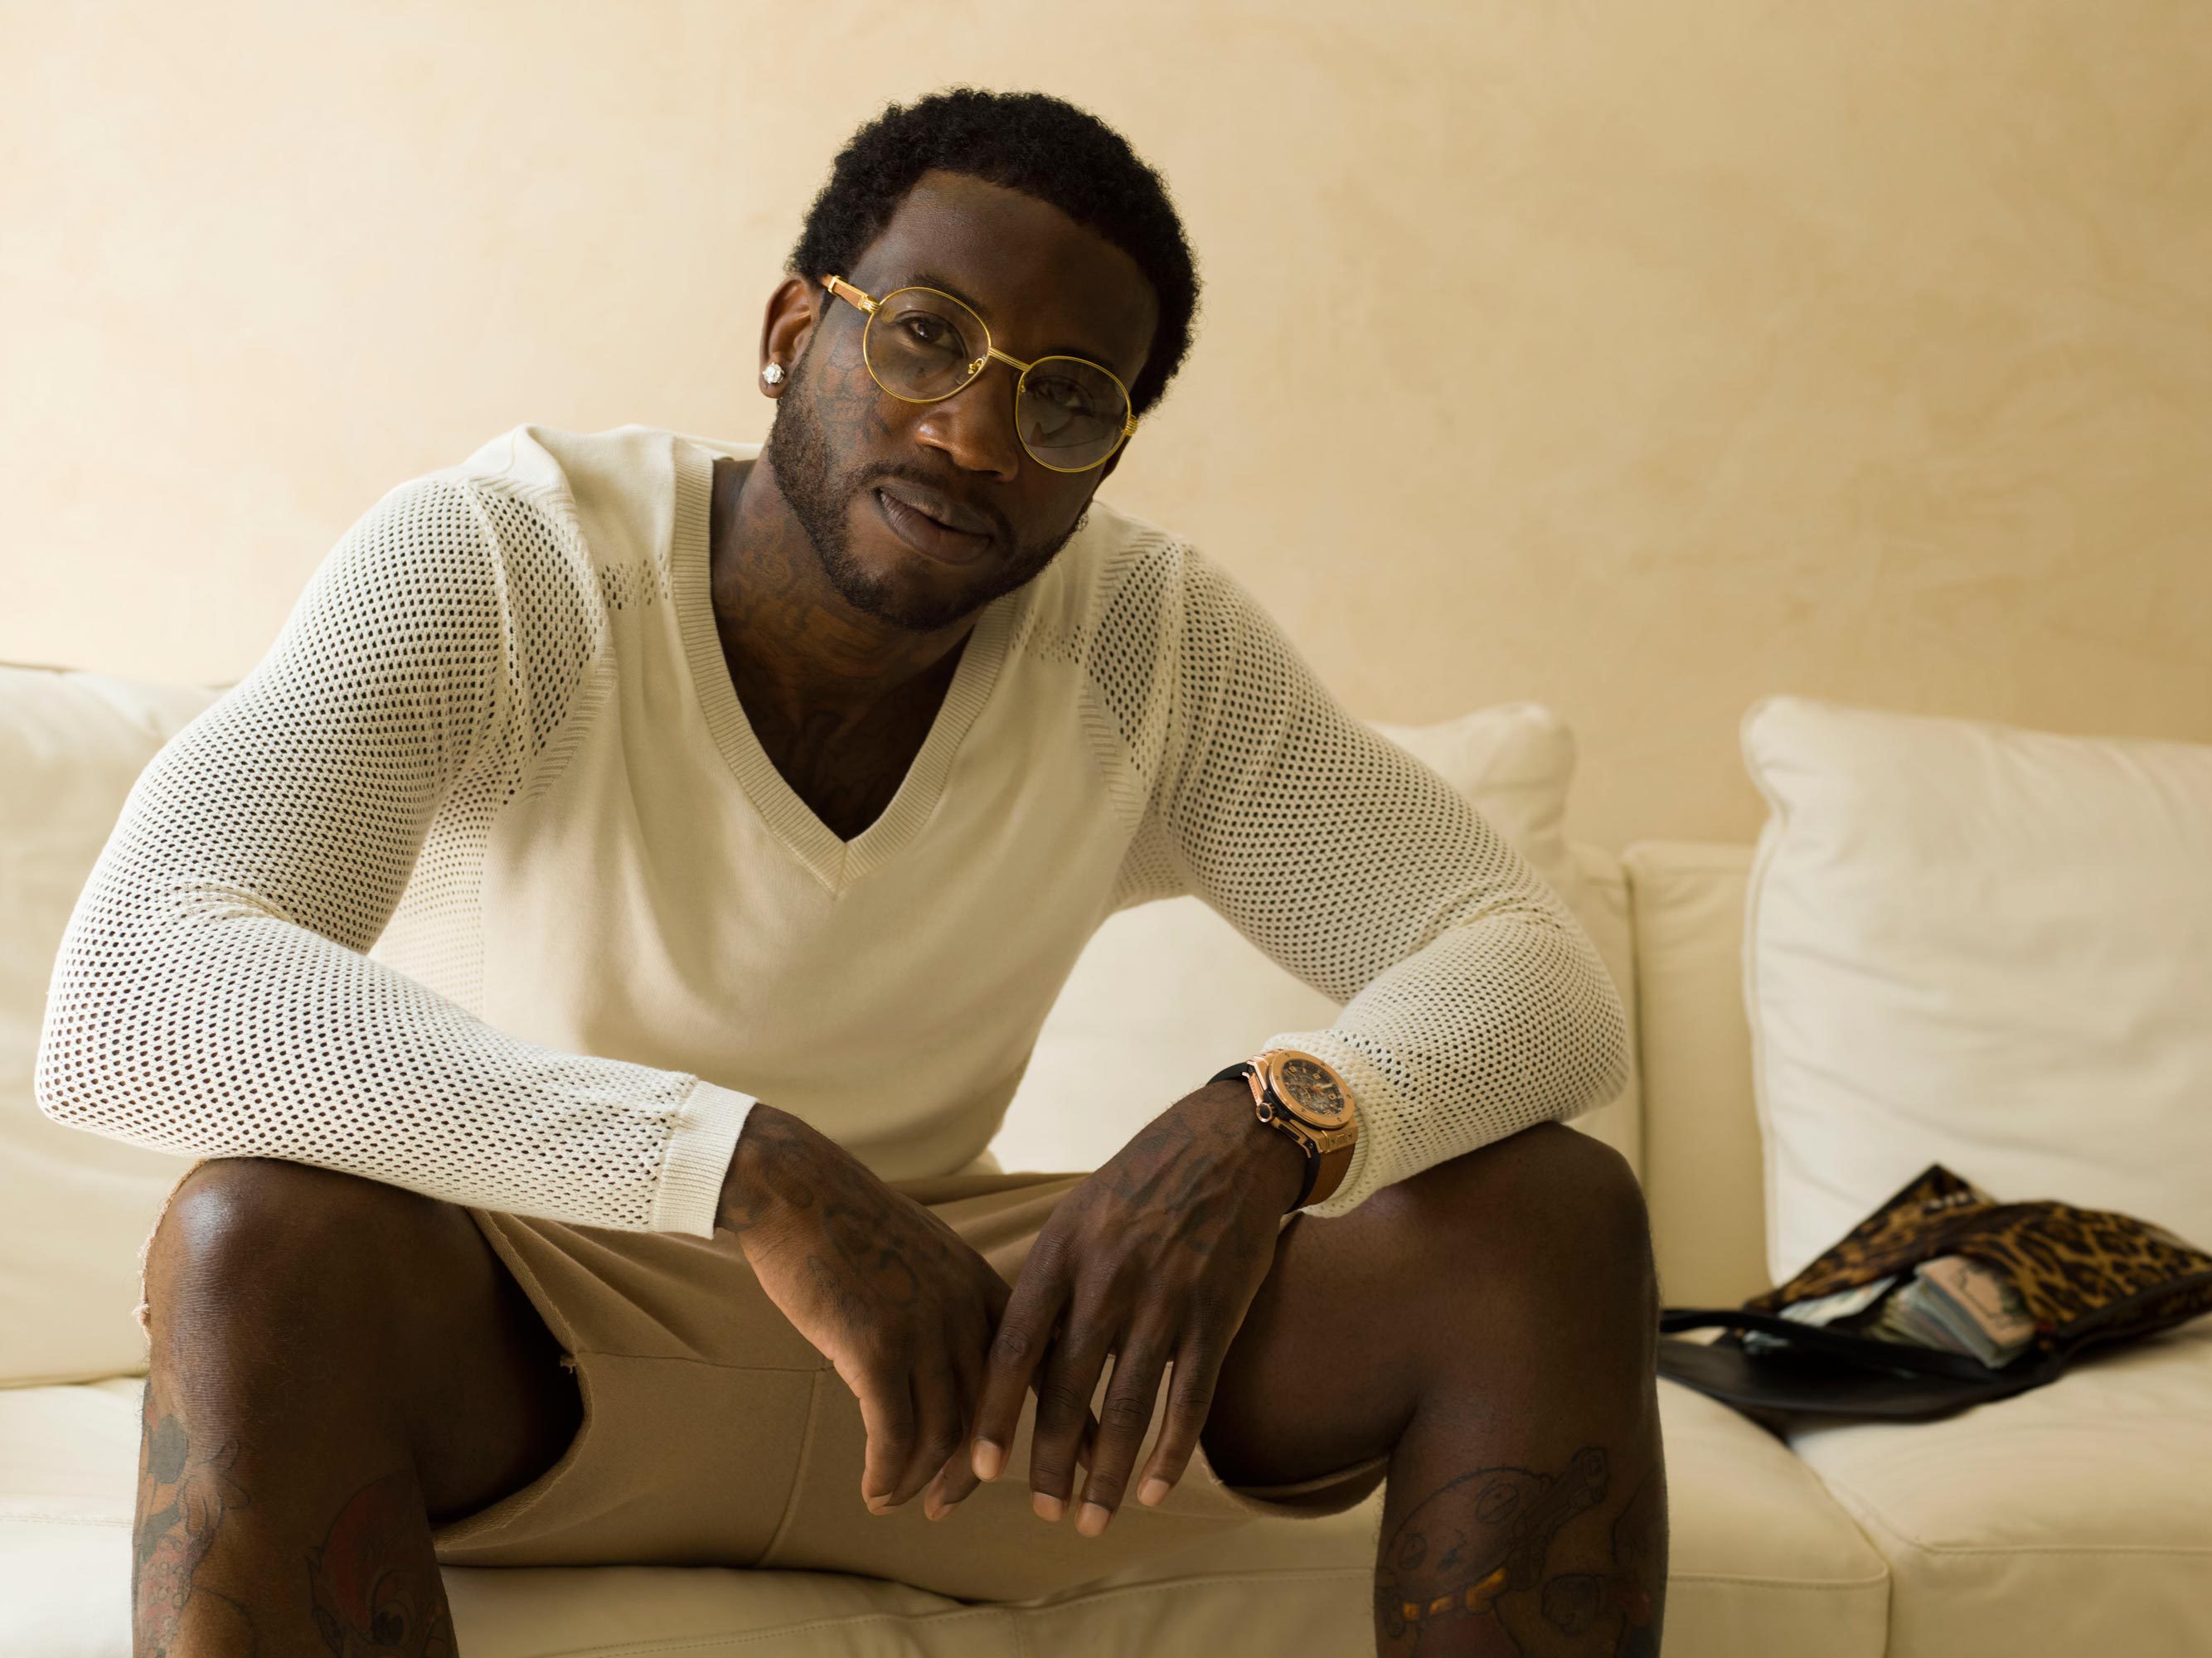 Gucci Mane Wallpaper Image Photos Pictures Background